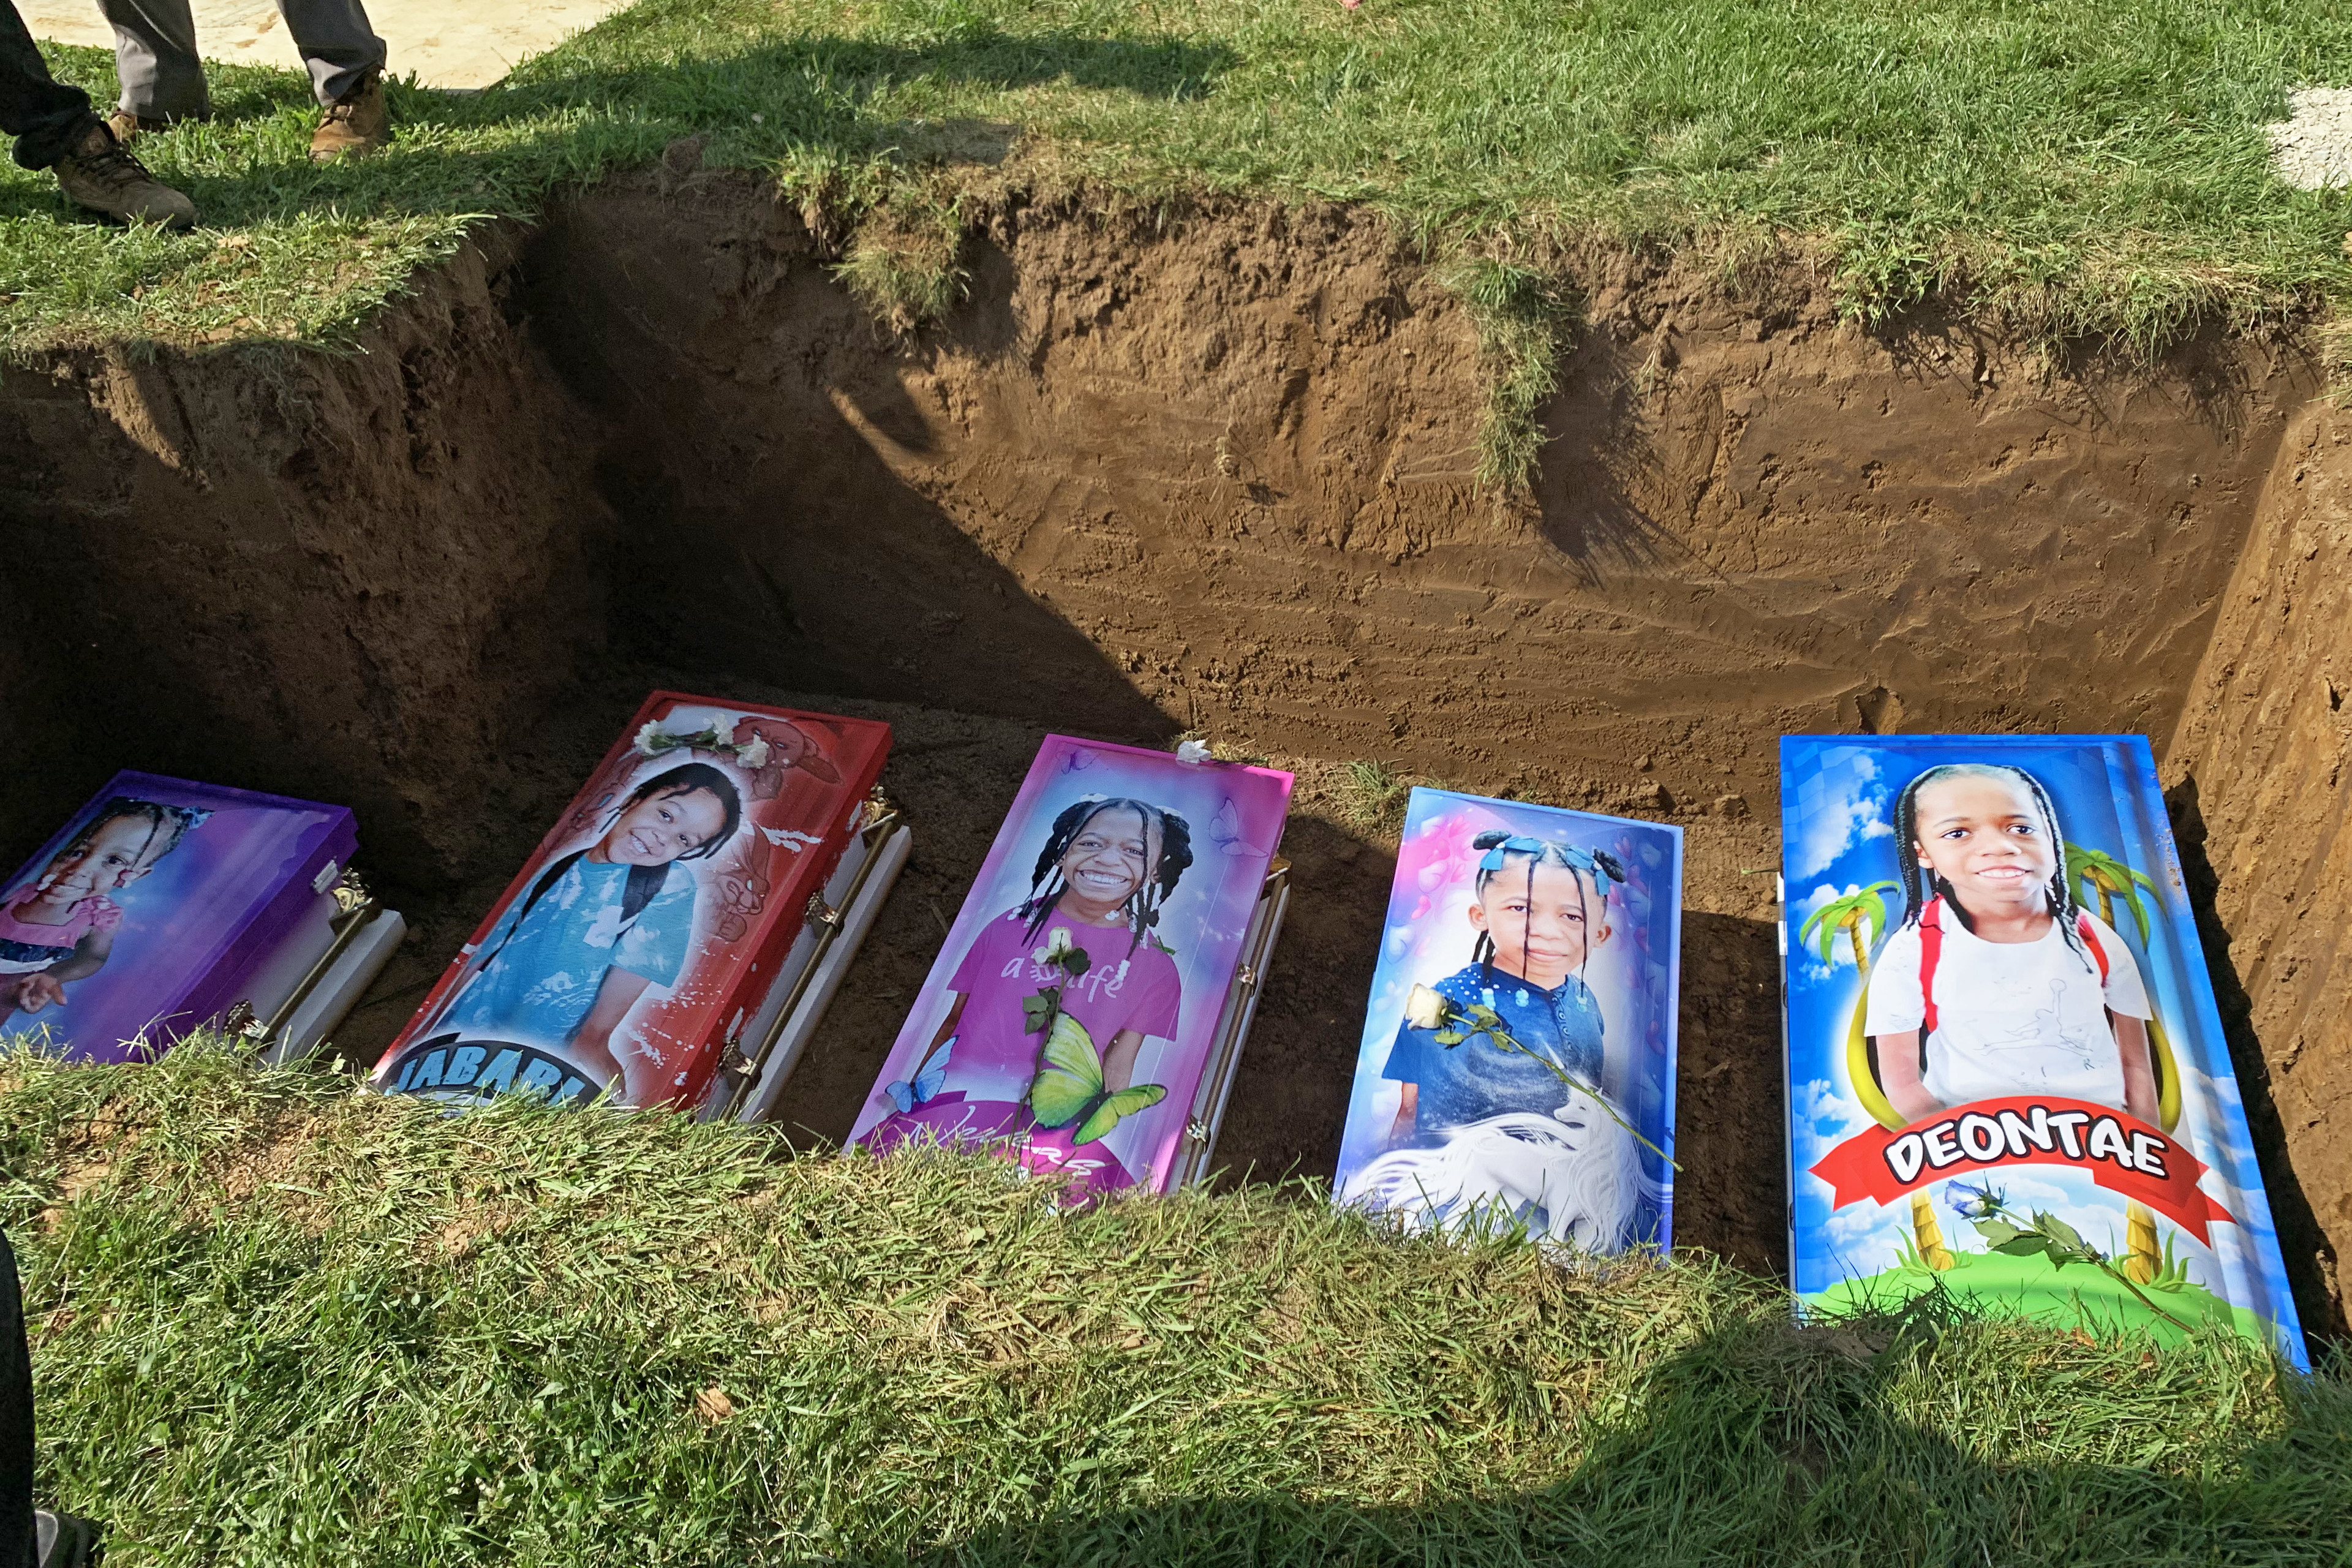 The caskets of five children lay in the ground, printed with images of themselves and bright colors.